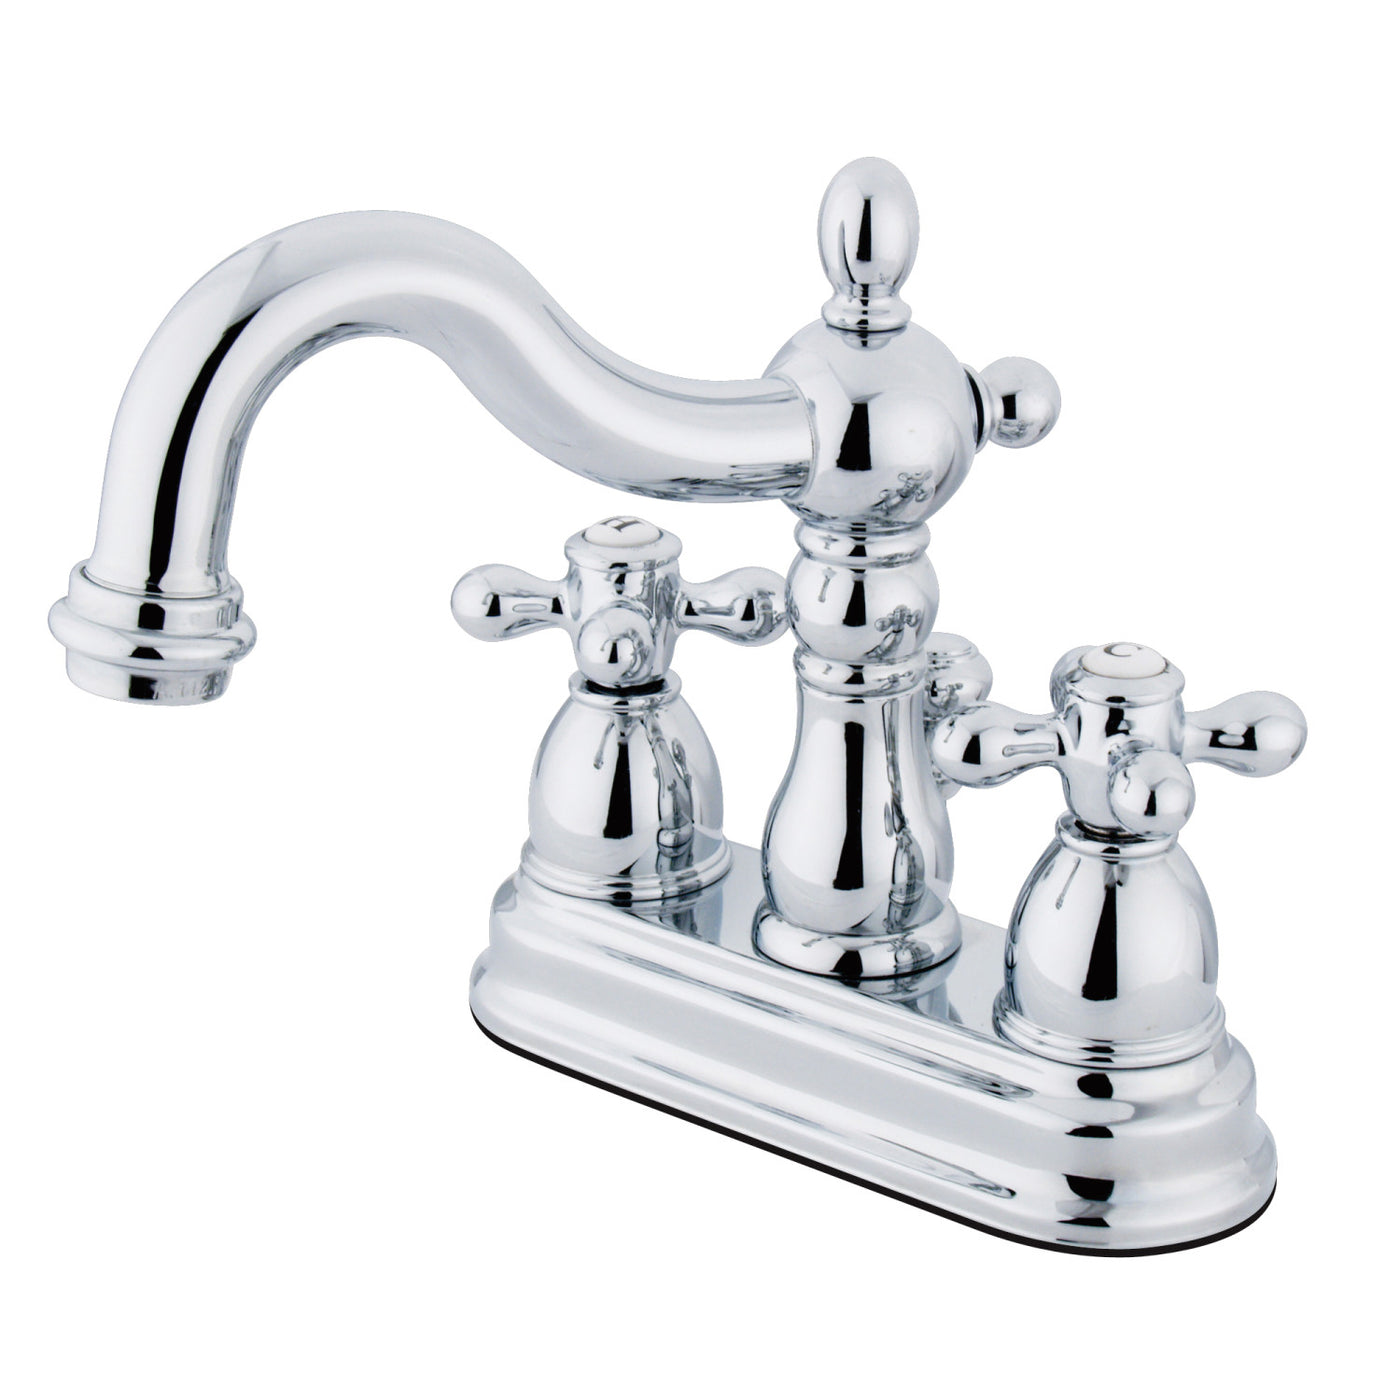 Elements of Design EB1601AX 4-Inch Centerset Bathroom Faucet with Plastic Pop-Up, Polished Chrome